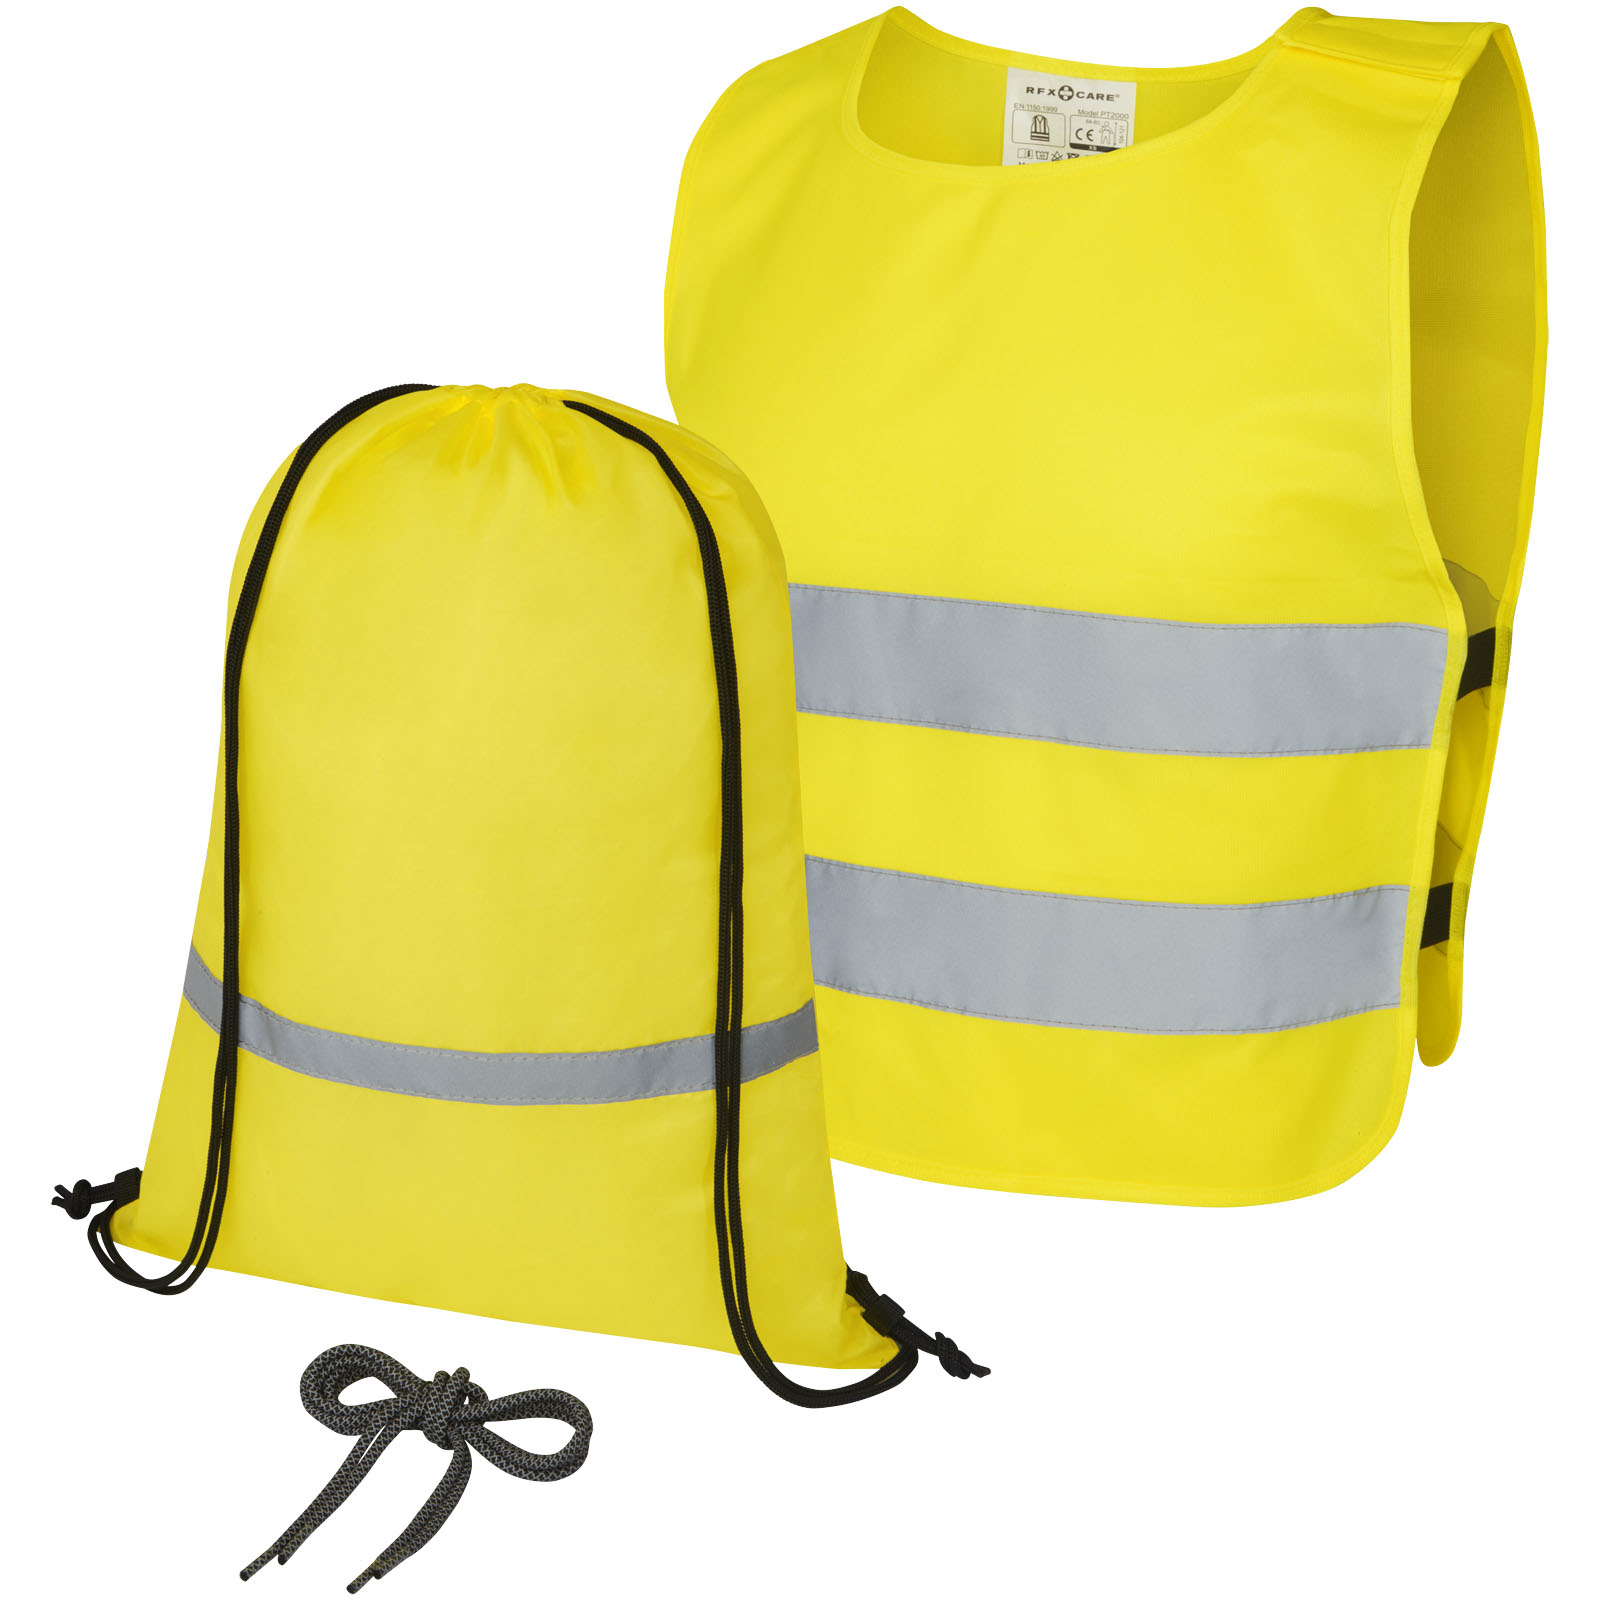 Reflective Items - RFX™ Ingeborg safety and visibility set for childeren 7-12 years